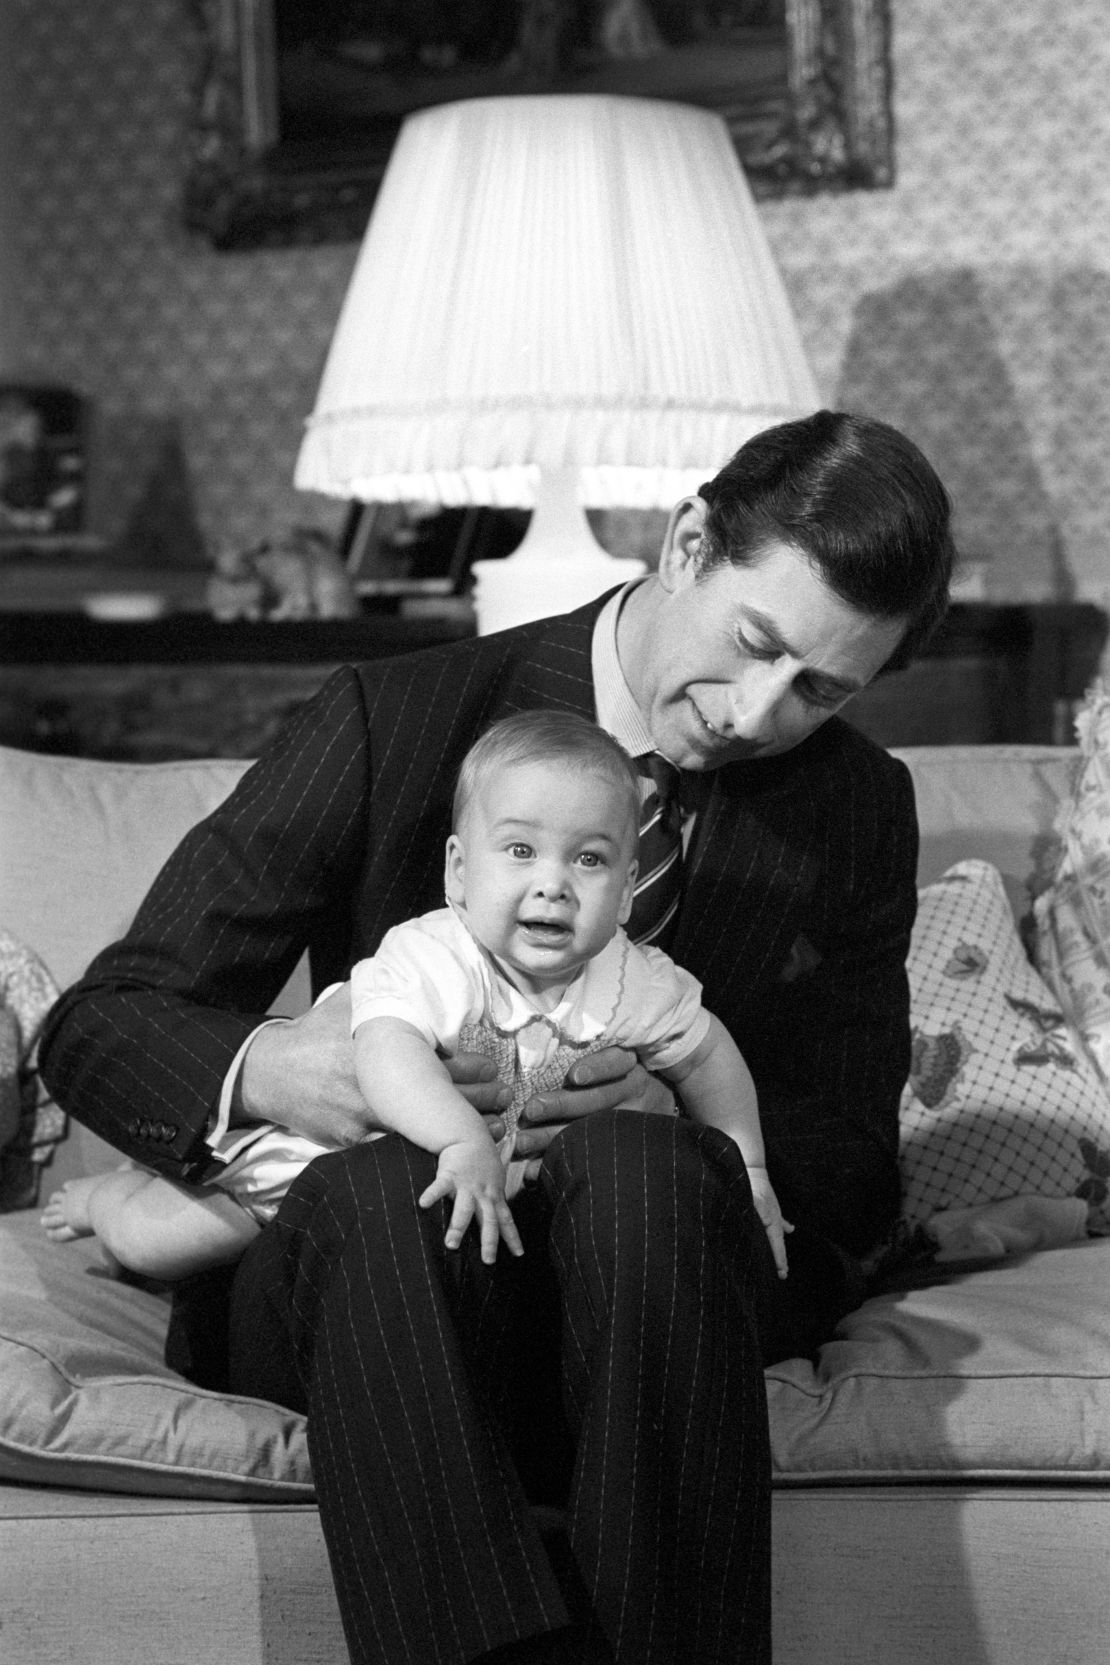 Prince Charles cradles his son Prince William at Kensington Palace in 1982.